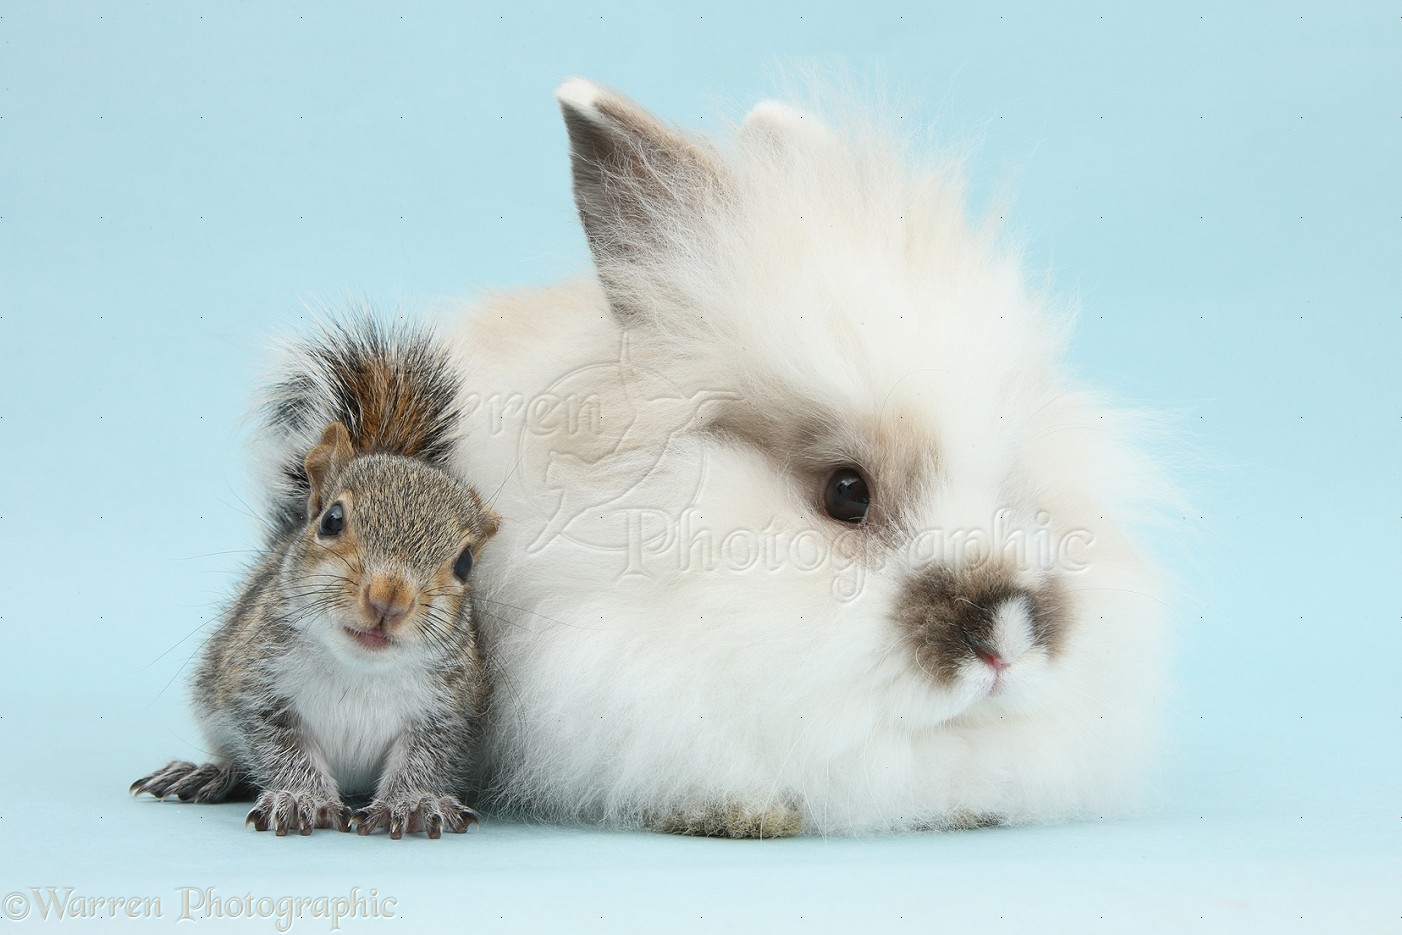 33614-Young-Grey-Squirrel-and-fluffy-rabbit-on-blue-background.jpg